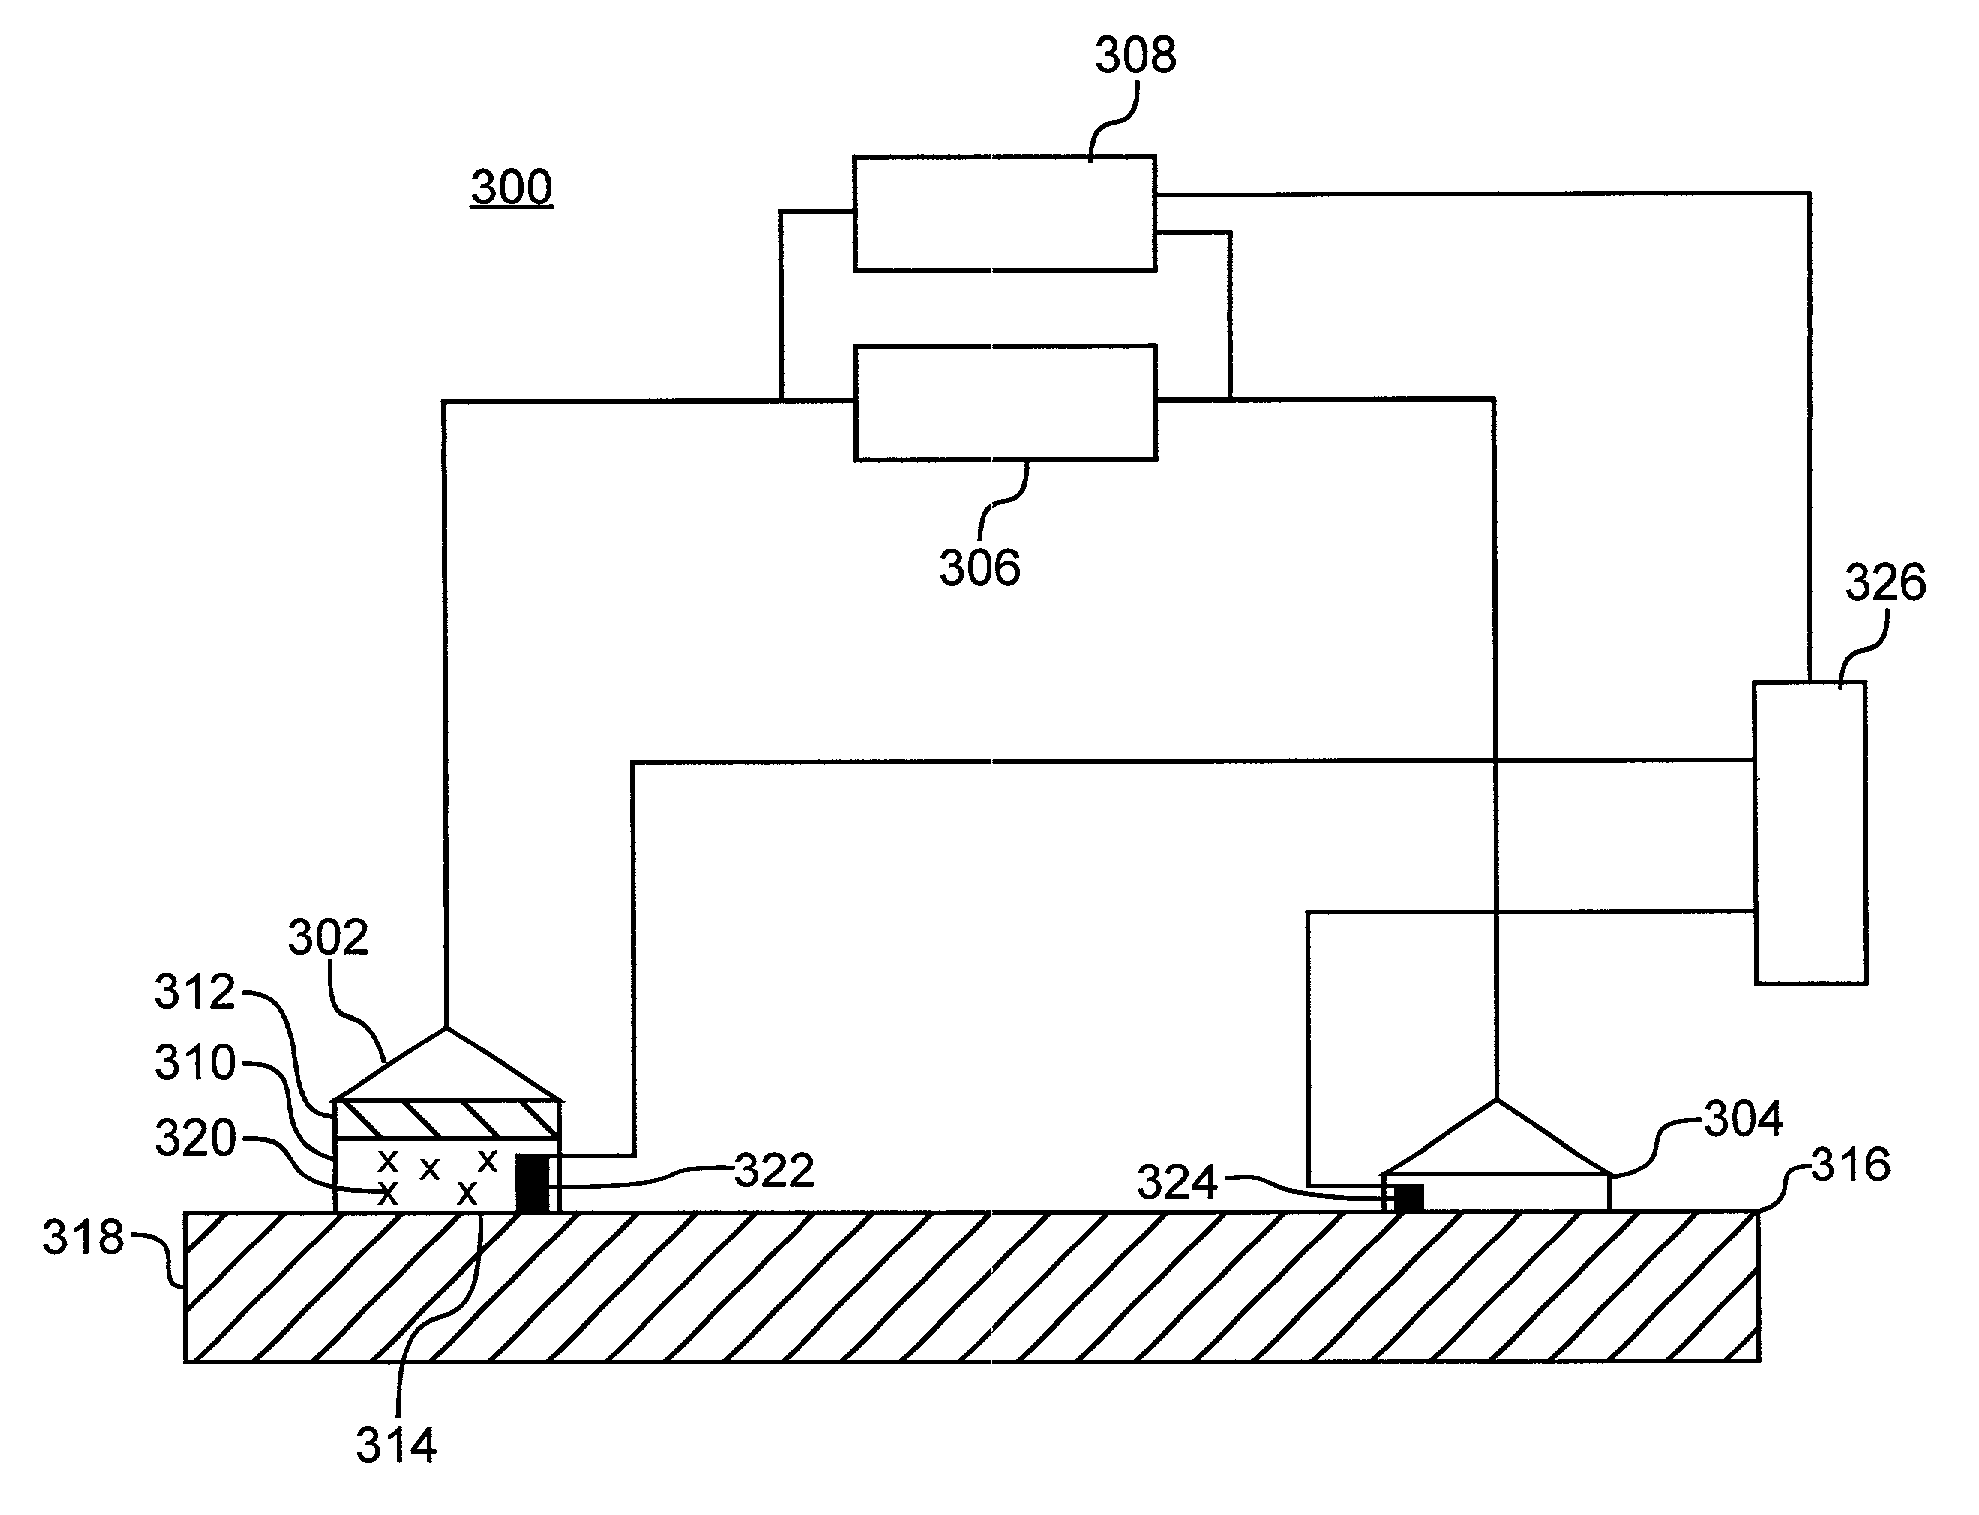 Method for increasing the battery life of an alternating current iontophoresis device using a barrier-modifying agent